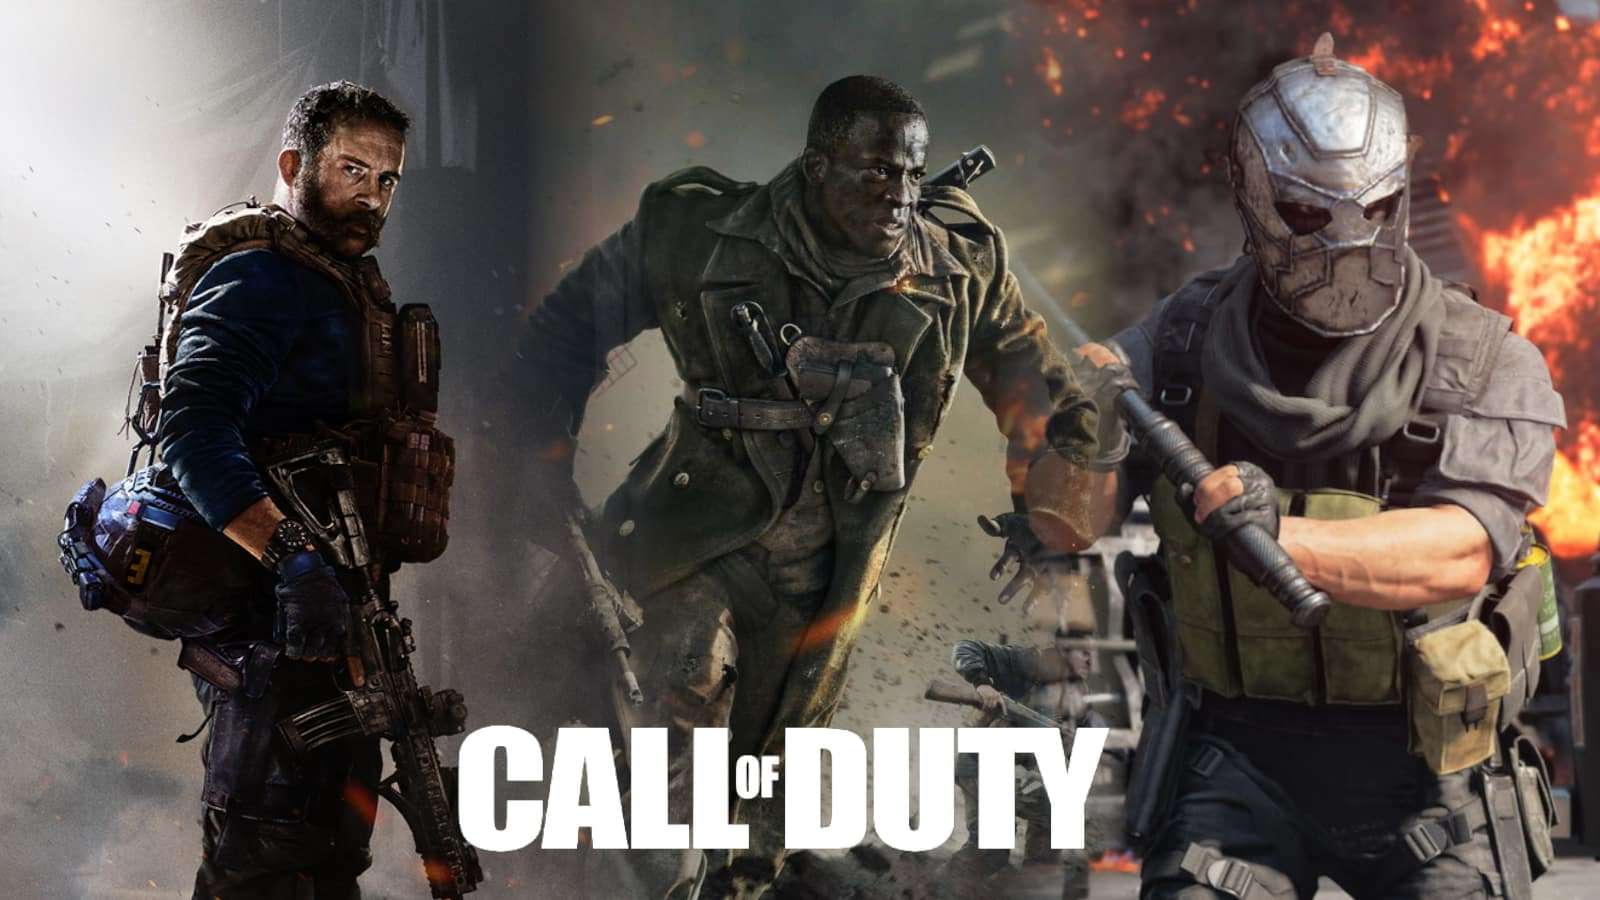 Call of Duty execs reportedly considering shift away from annual releases